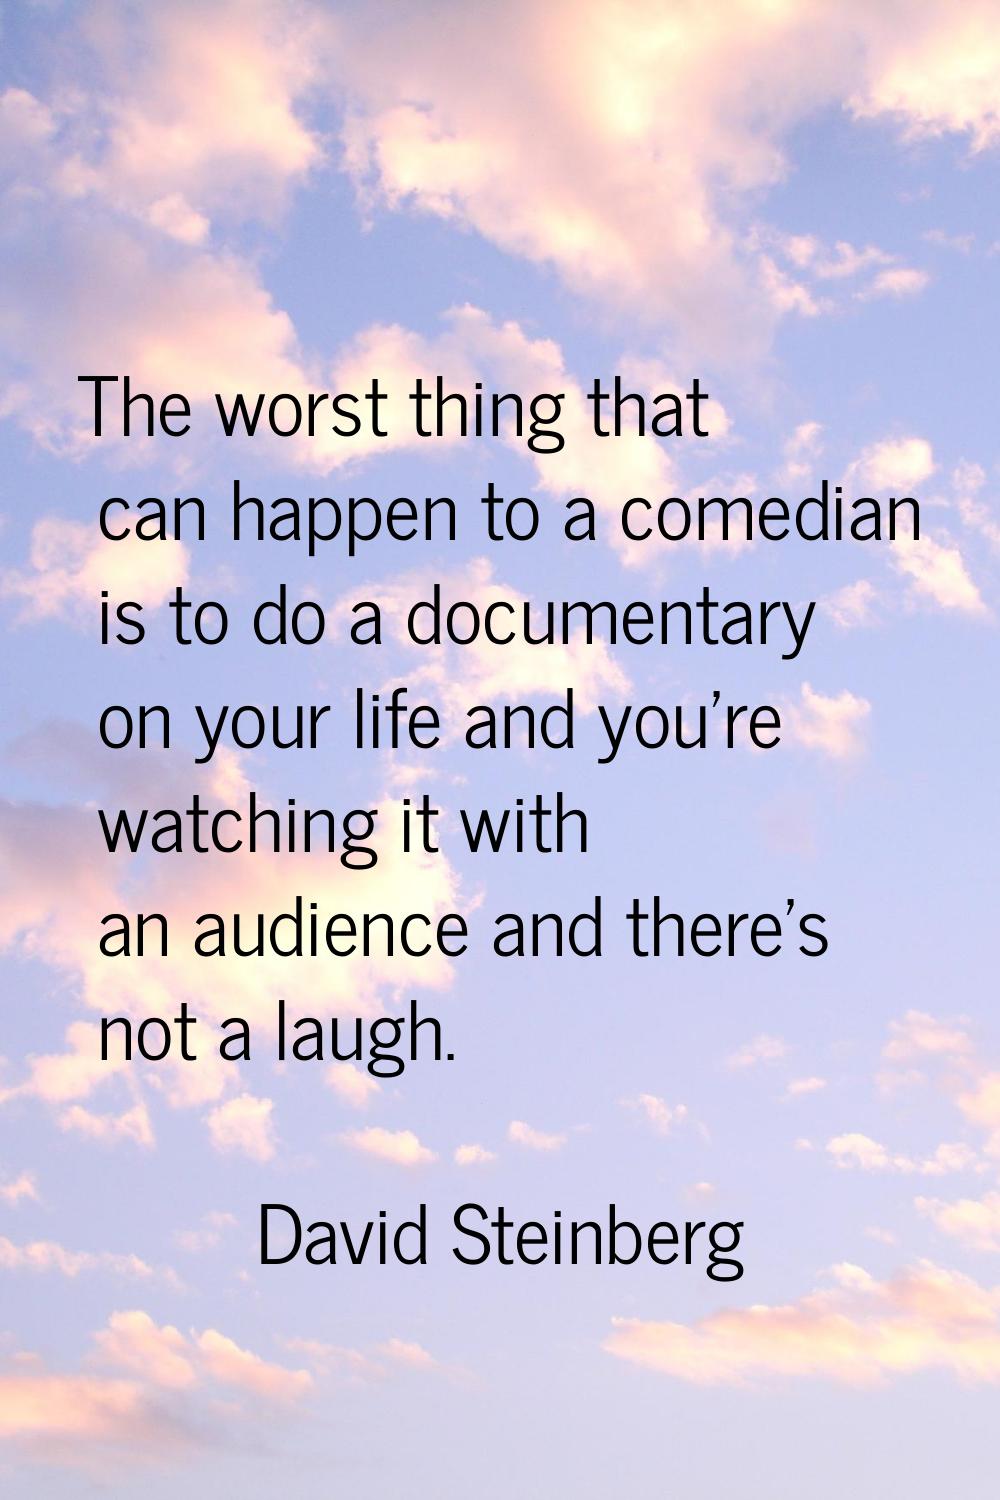 The worst thing that can happen to a comedian is to do a documentary on your life and you're watchi